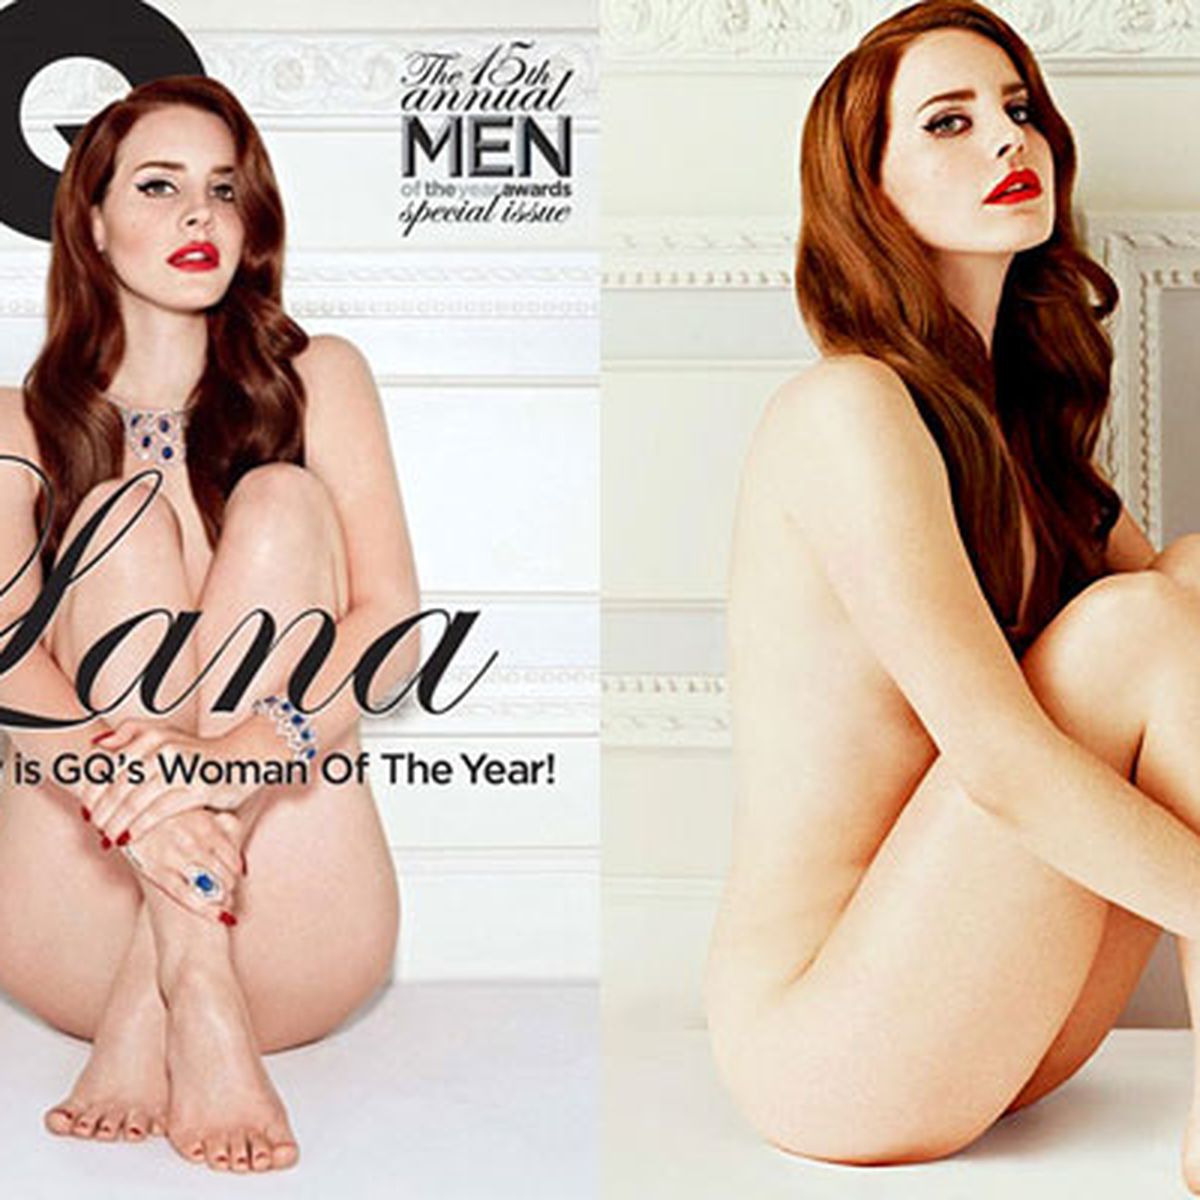 Lana Del Rey poses nude, gets groped in <i>GQ</i> photo spread - 9Celebrity